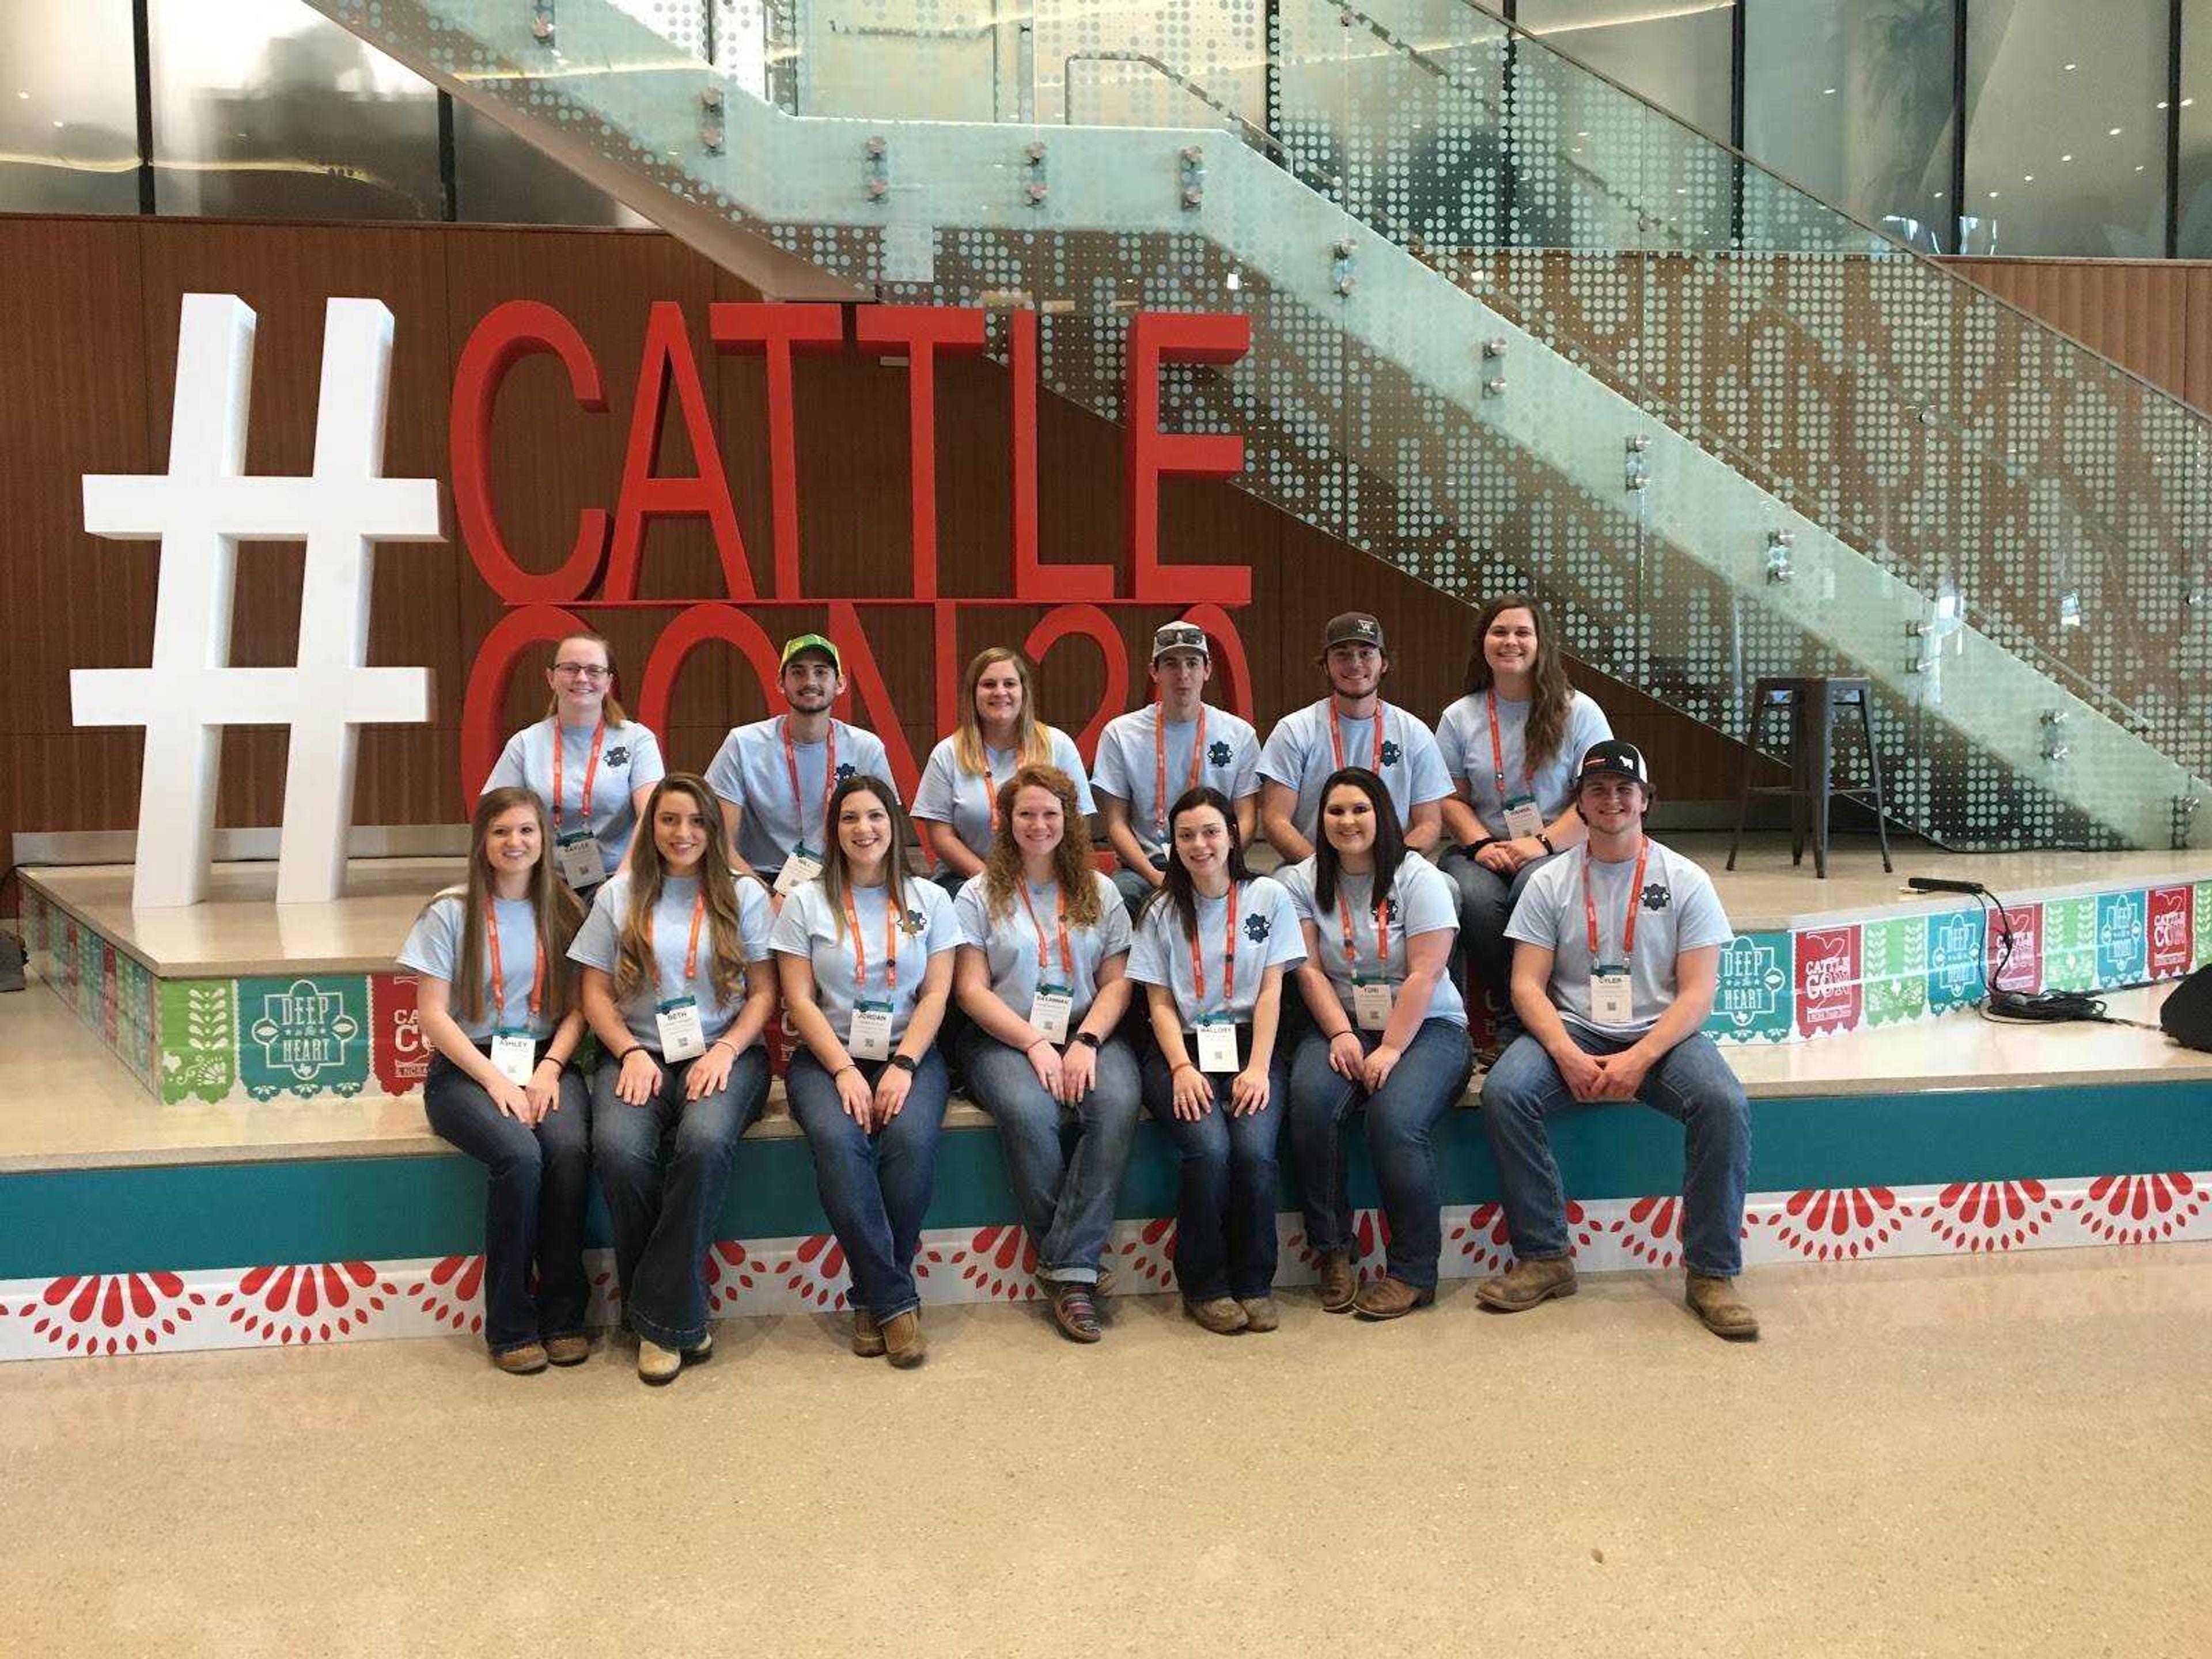 Members of the Southeast Collegiate Cattlemen’s Association at the Cattle Industry Convention in San Antonio, TX. 